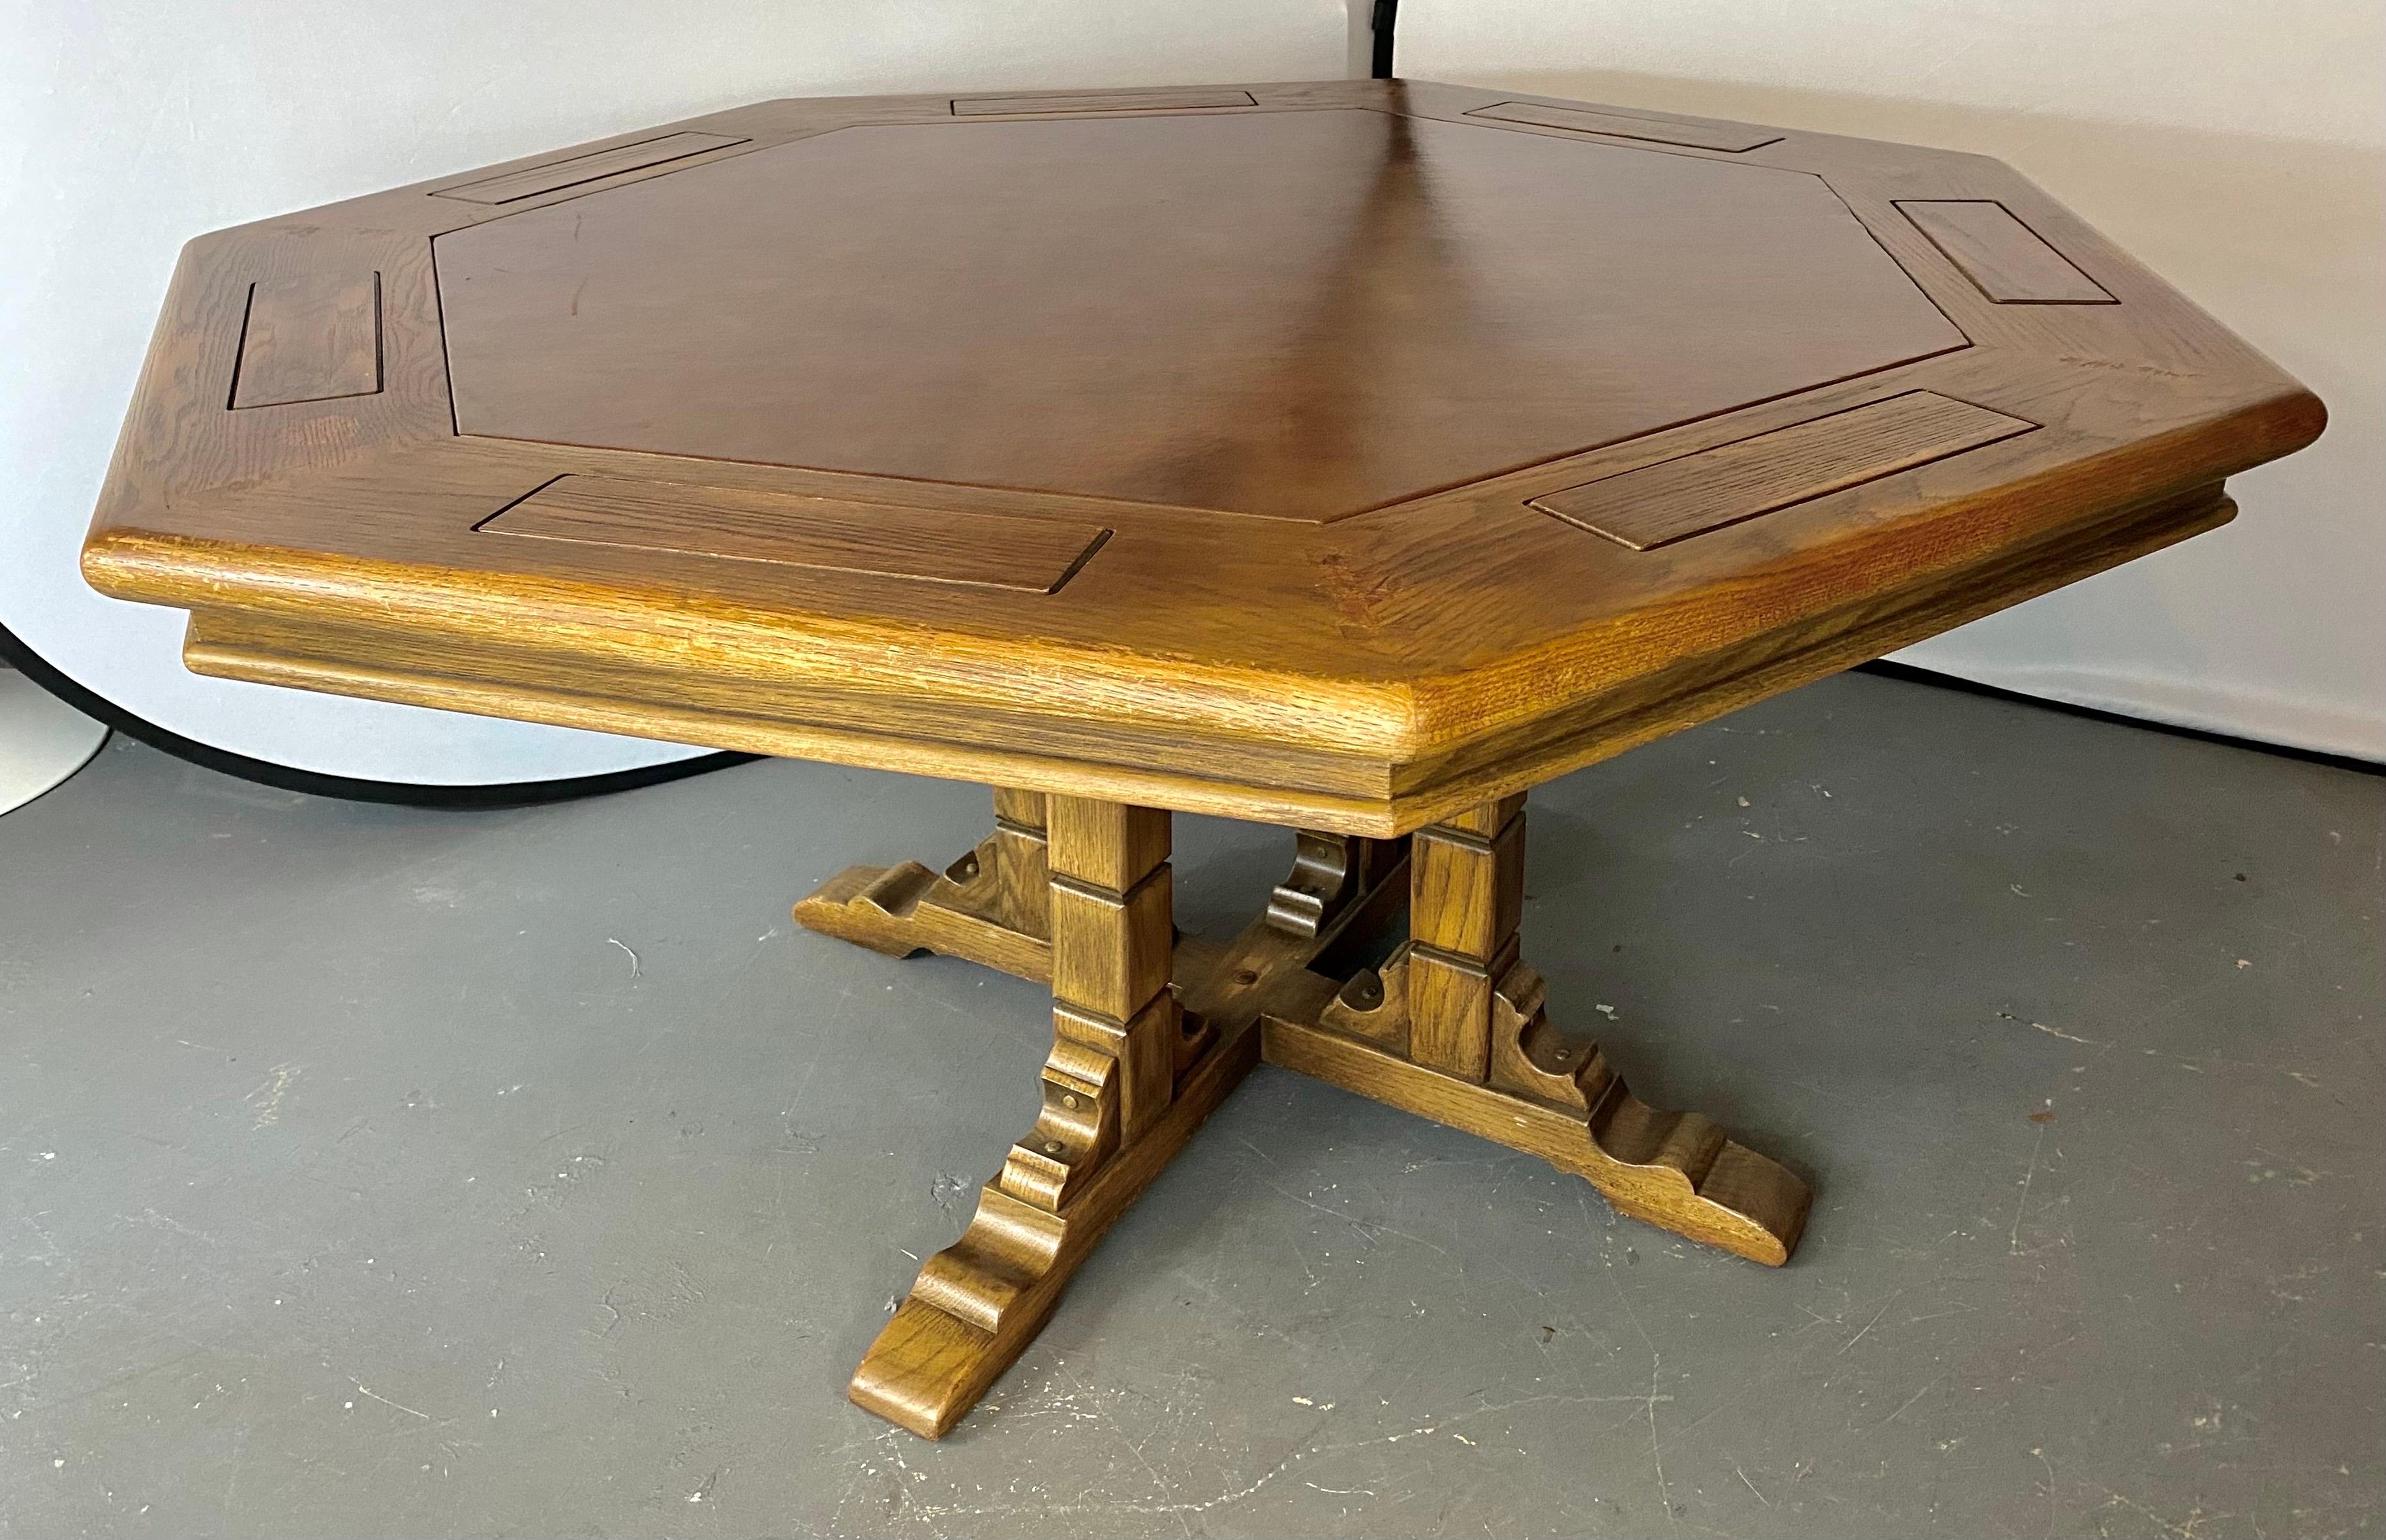 An impressive and rare Romweber Viking oak poker game table and matching chairs. The table features 7 sides and a faux leather / vinyl tooled top in light brown matching nicely the color of the wood. The table has 7 solid oak chip holders or caddies